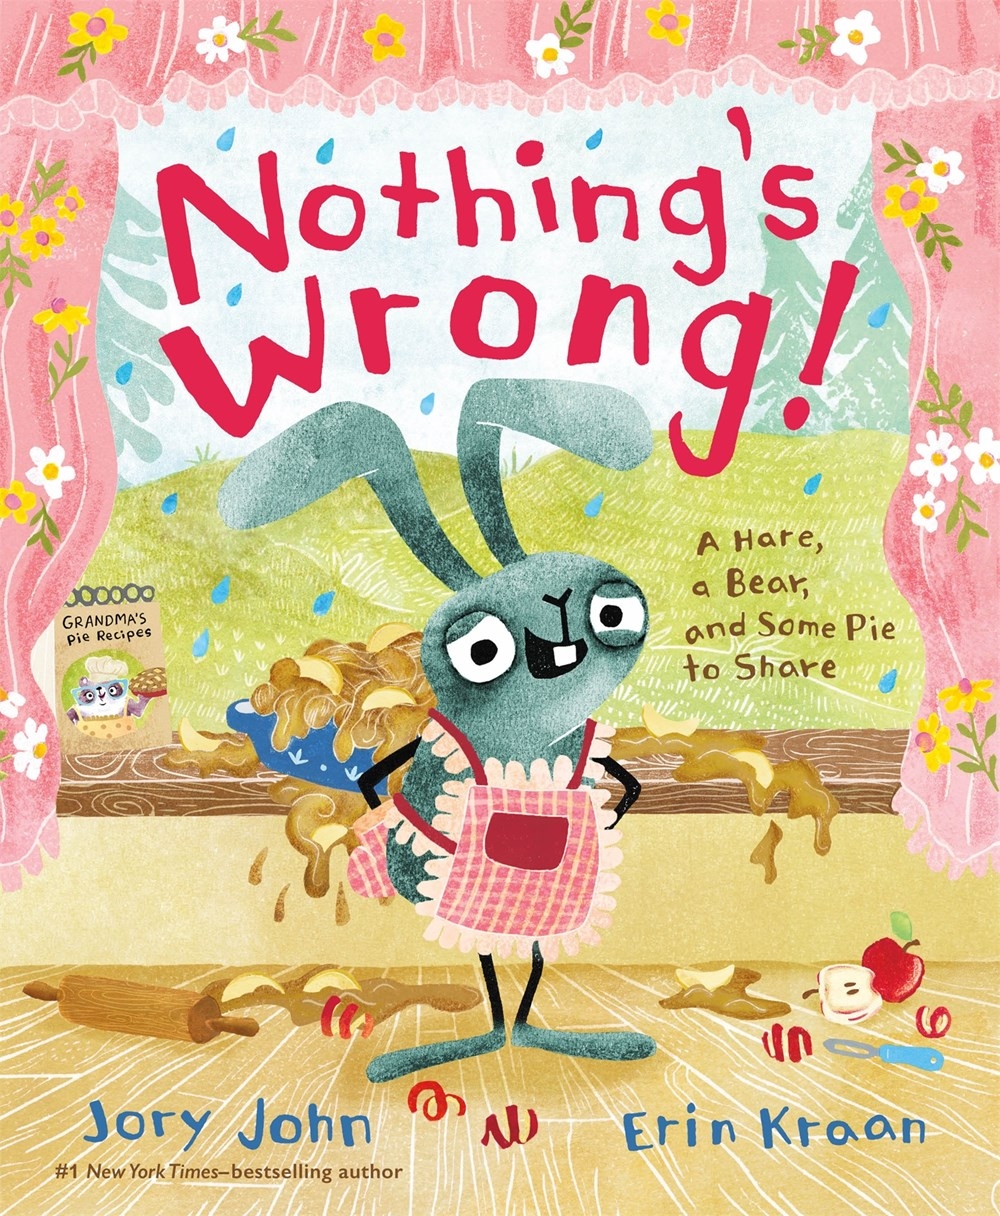 Nothing’s Wrong!: A Hare, a Bear, and Some Pie to Share